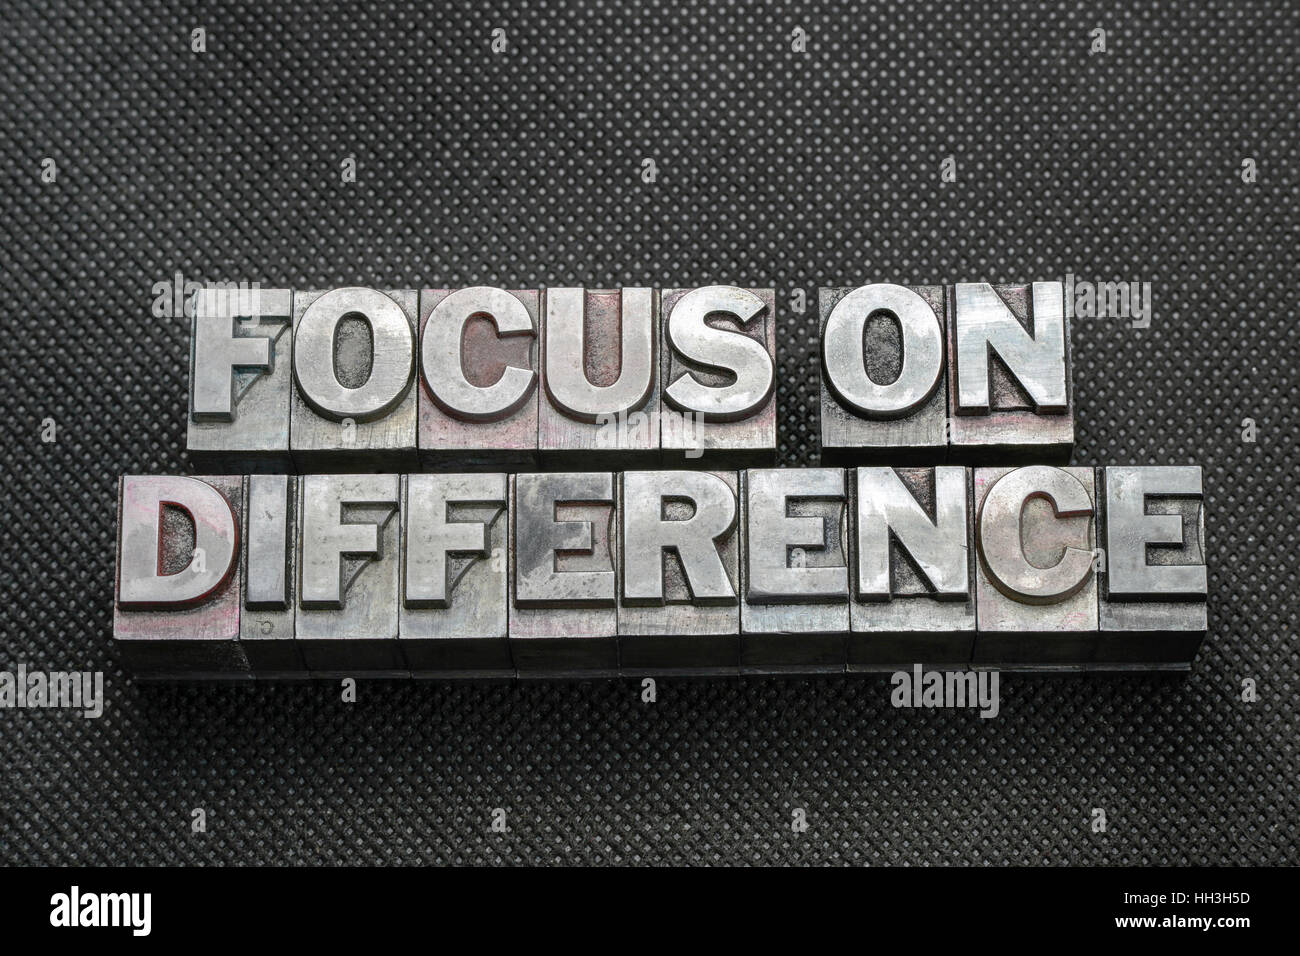 focus on difference phrase made from metallic letterpress blocks on black perforated surface Stock Photo